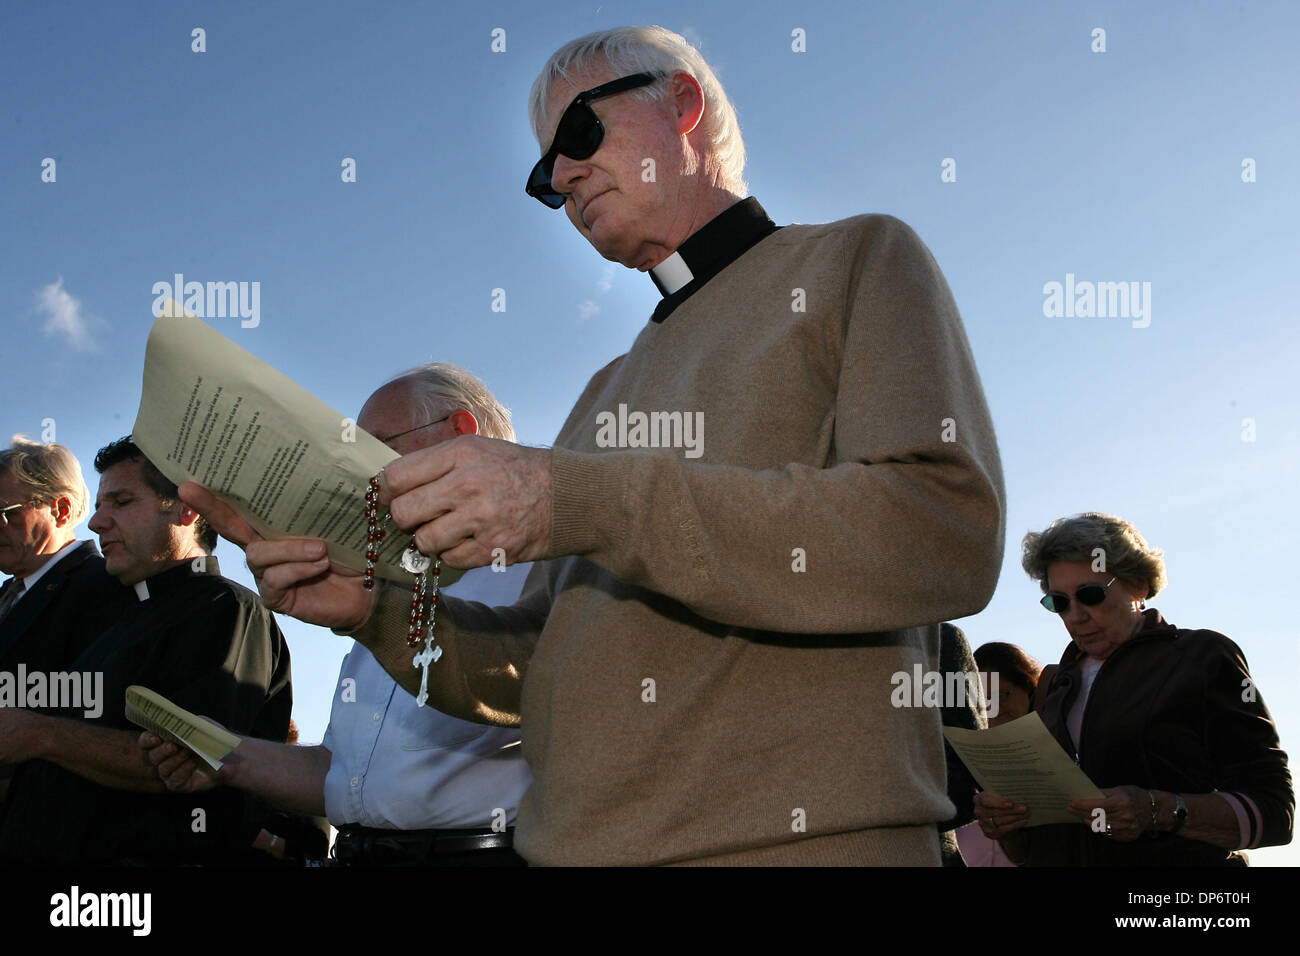 Oct 25, 2006; Starke, FL, USA; Father Fred R. Ruse, of St. John Vianney Catholic Church in Orlando prays with other demonstrators outside of the Florida State Prison in Starke, where convicted serial killer Danny Rolling was executed by lethal injection on October 25, 2006.  Rolling was responsible for the slaying of five college students in 1990. Mandatory Credit: Photo by J. Gwen Stock Photo